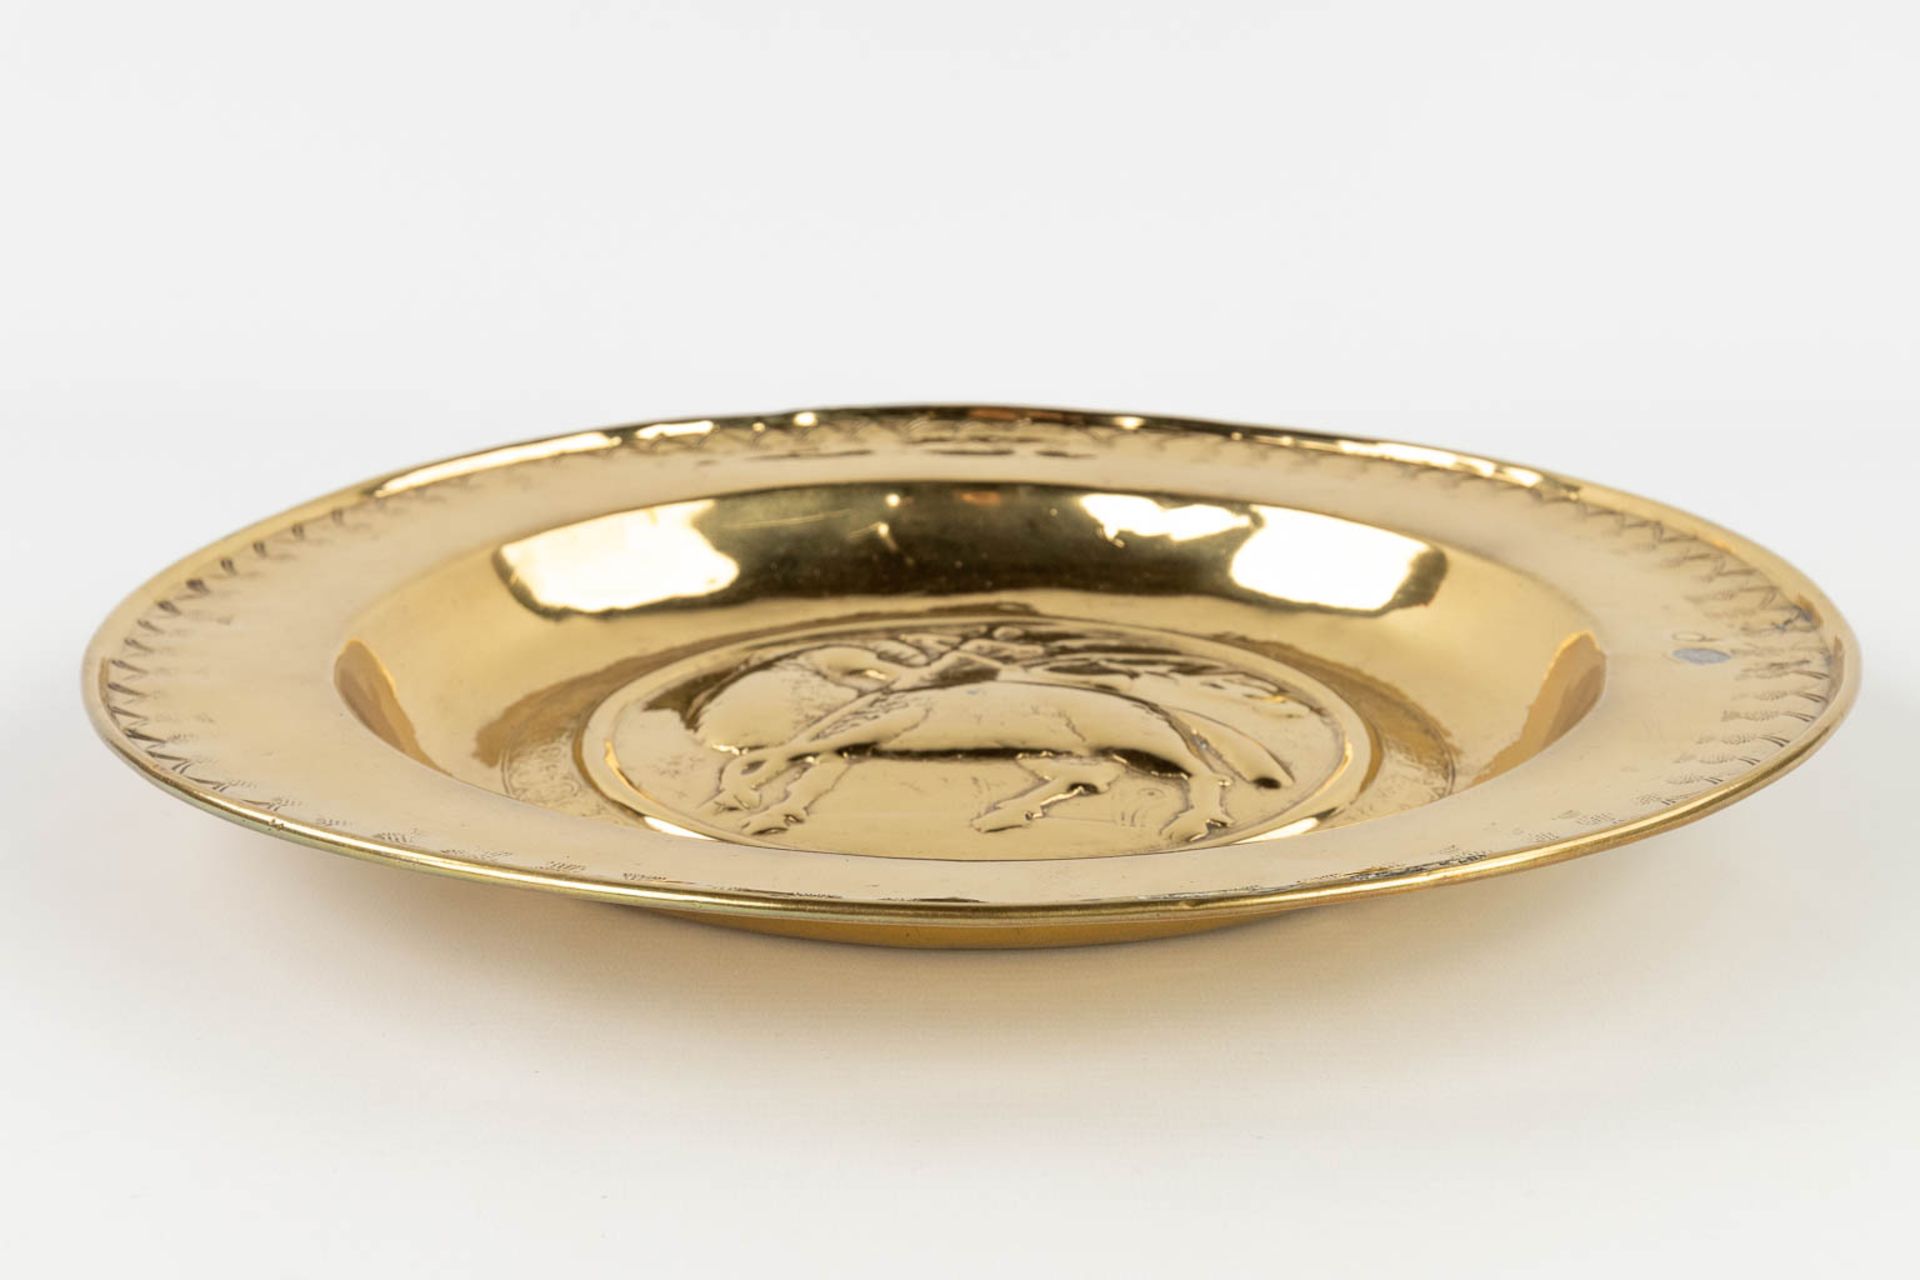 A large baptism bowl, Brass, images of the Holy Lamb. 16th/17th C. (H:3,7 x D:37 cm) - Image 7 of 12